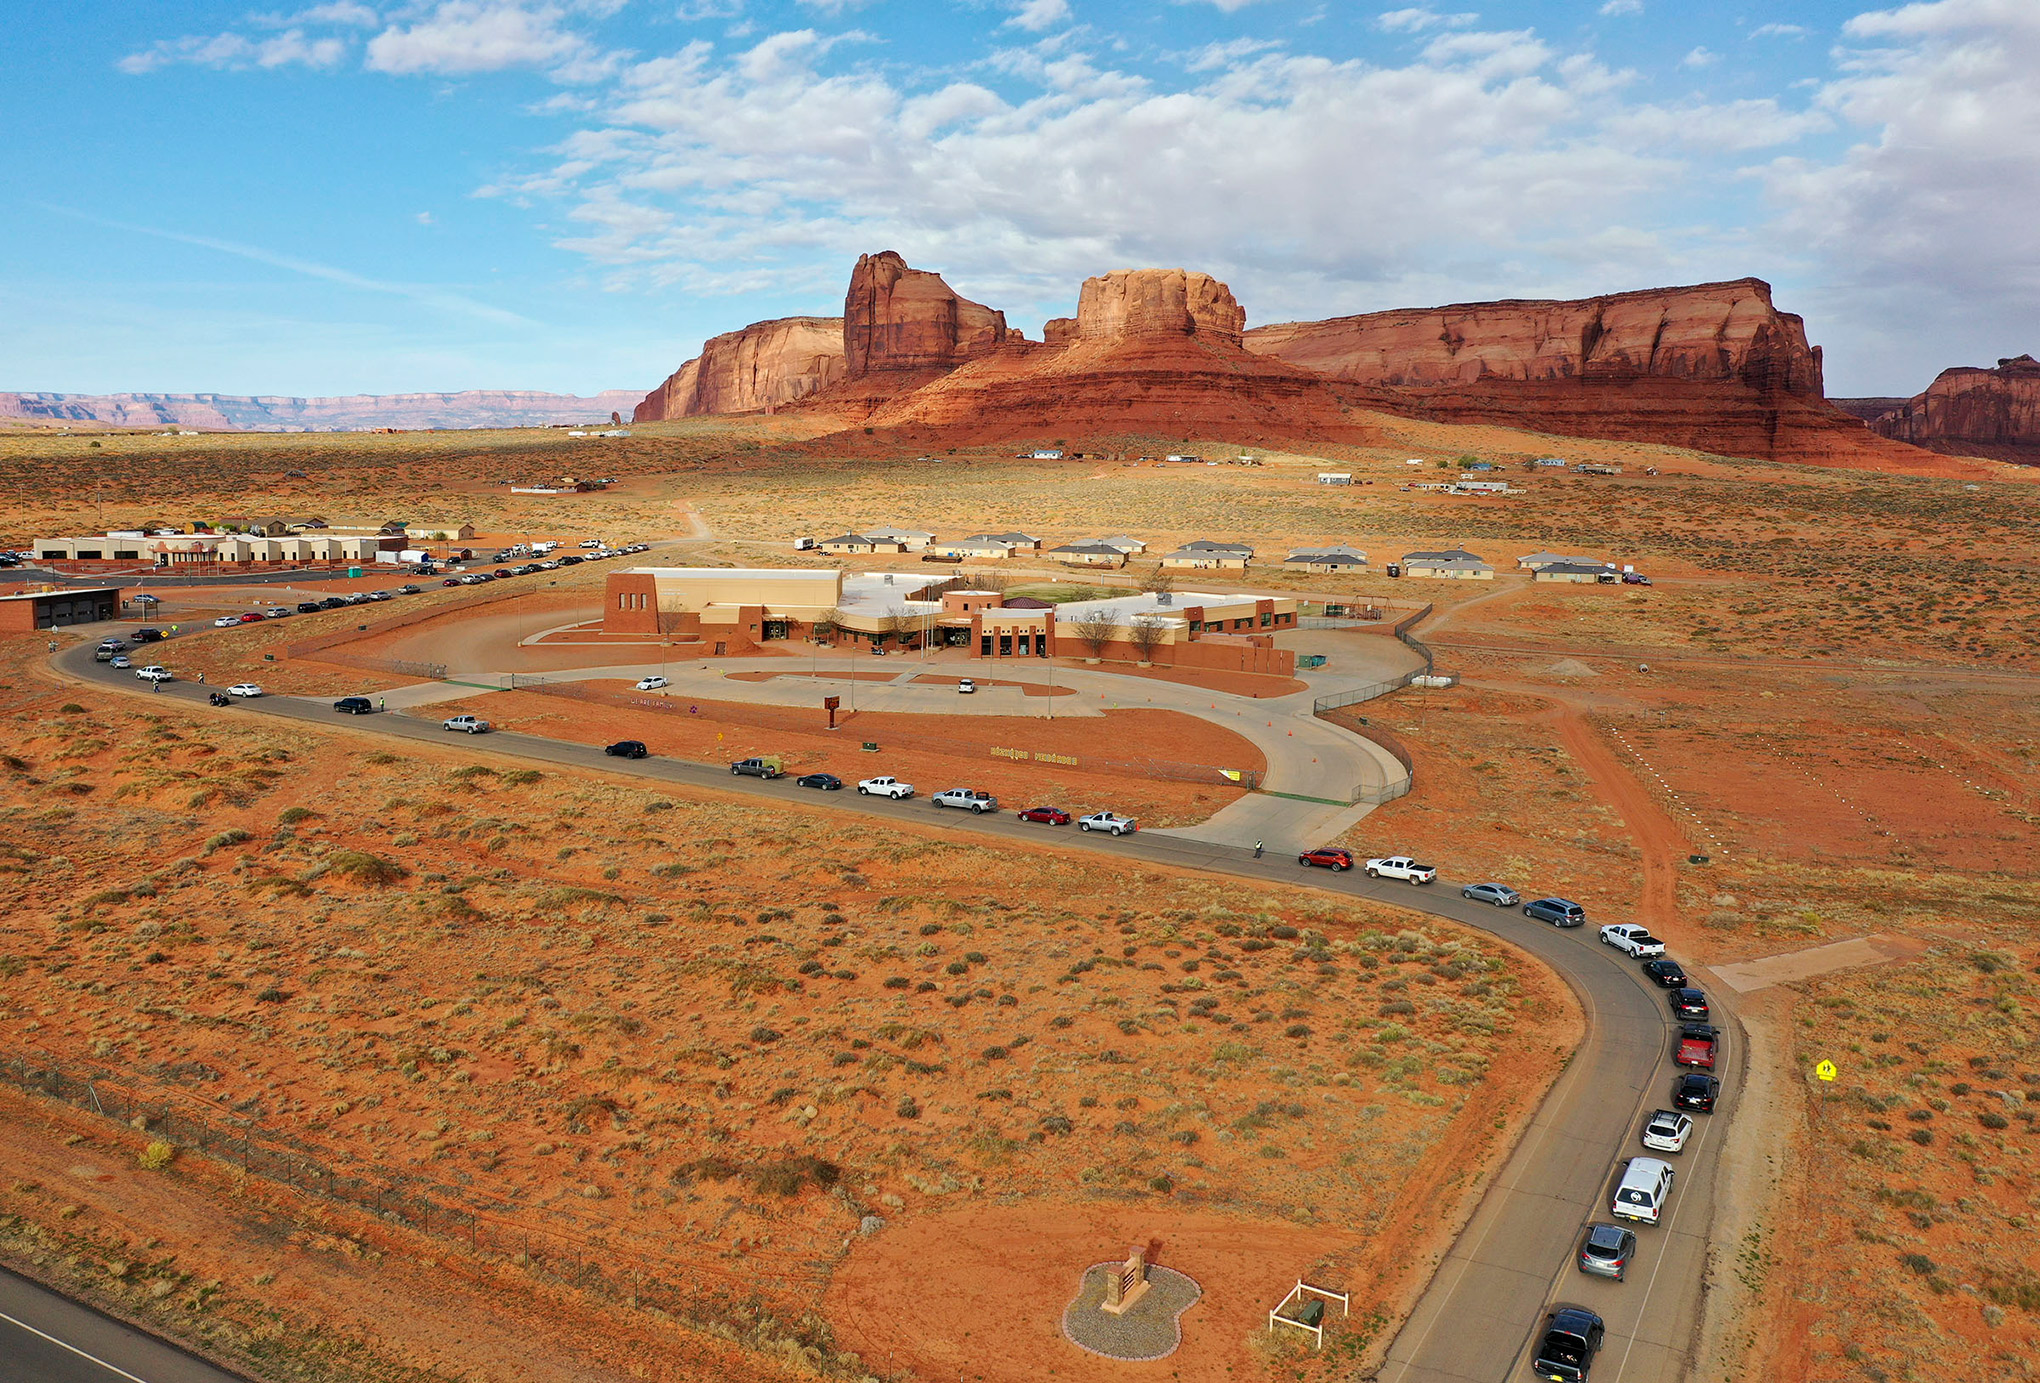 Vehicles line up for testing outside of the Monument Valley Health Center in Oljato-Monument Valley, Utah, on Apr. 17, 2020.